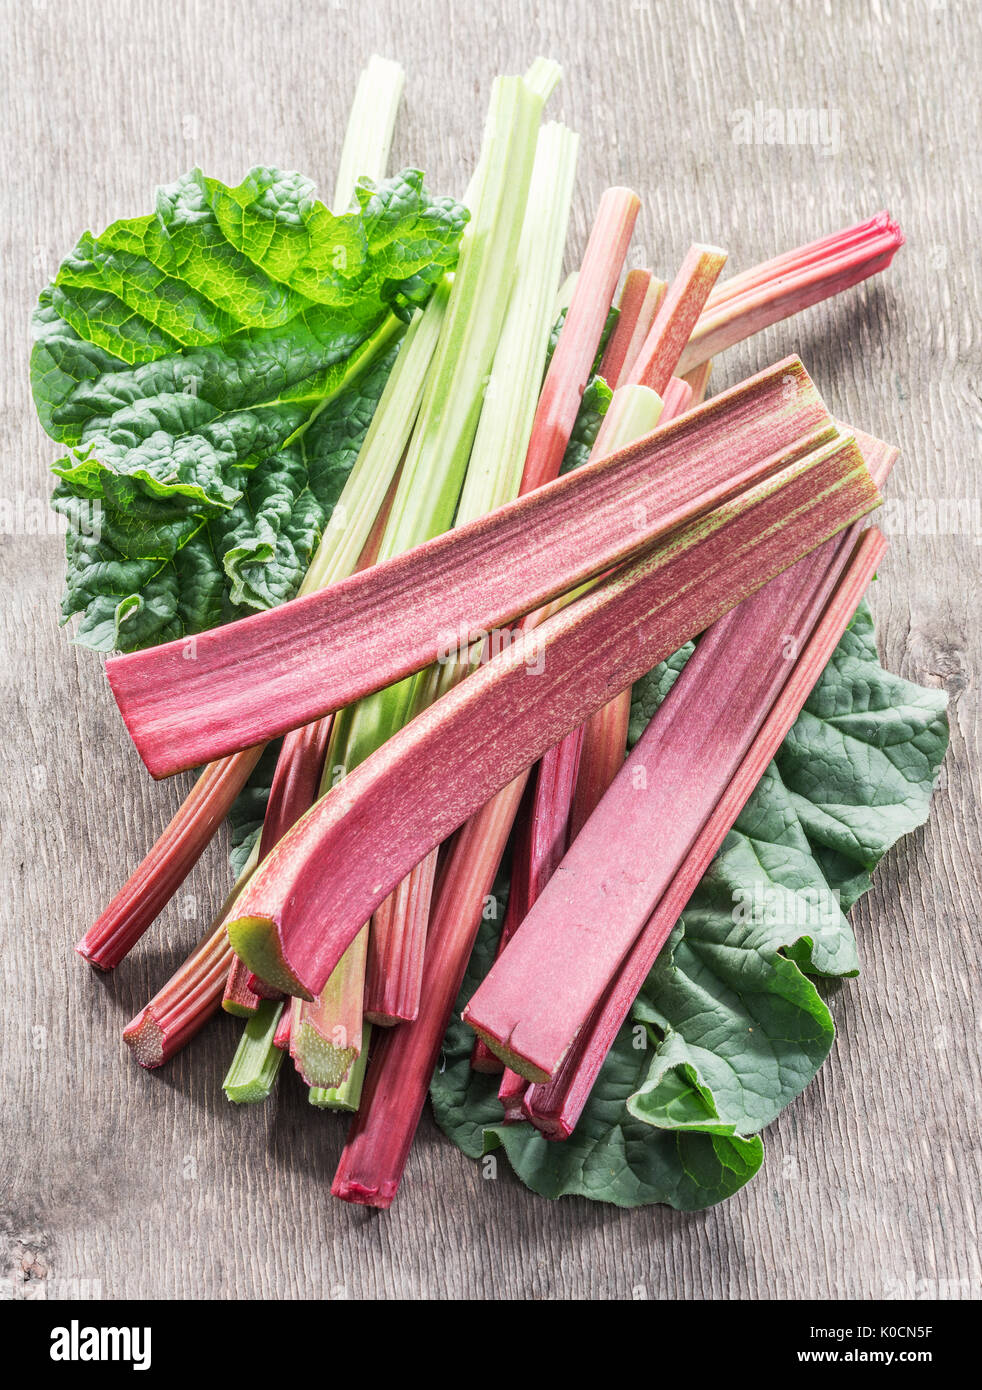 Edible rhubarb stalks on the wooden table. Stock Photo